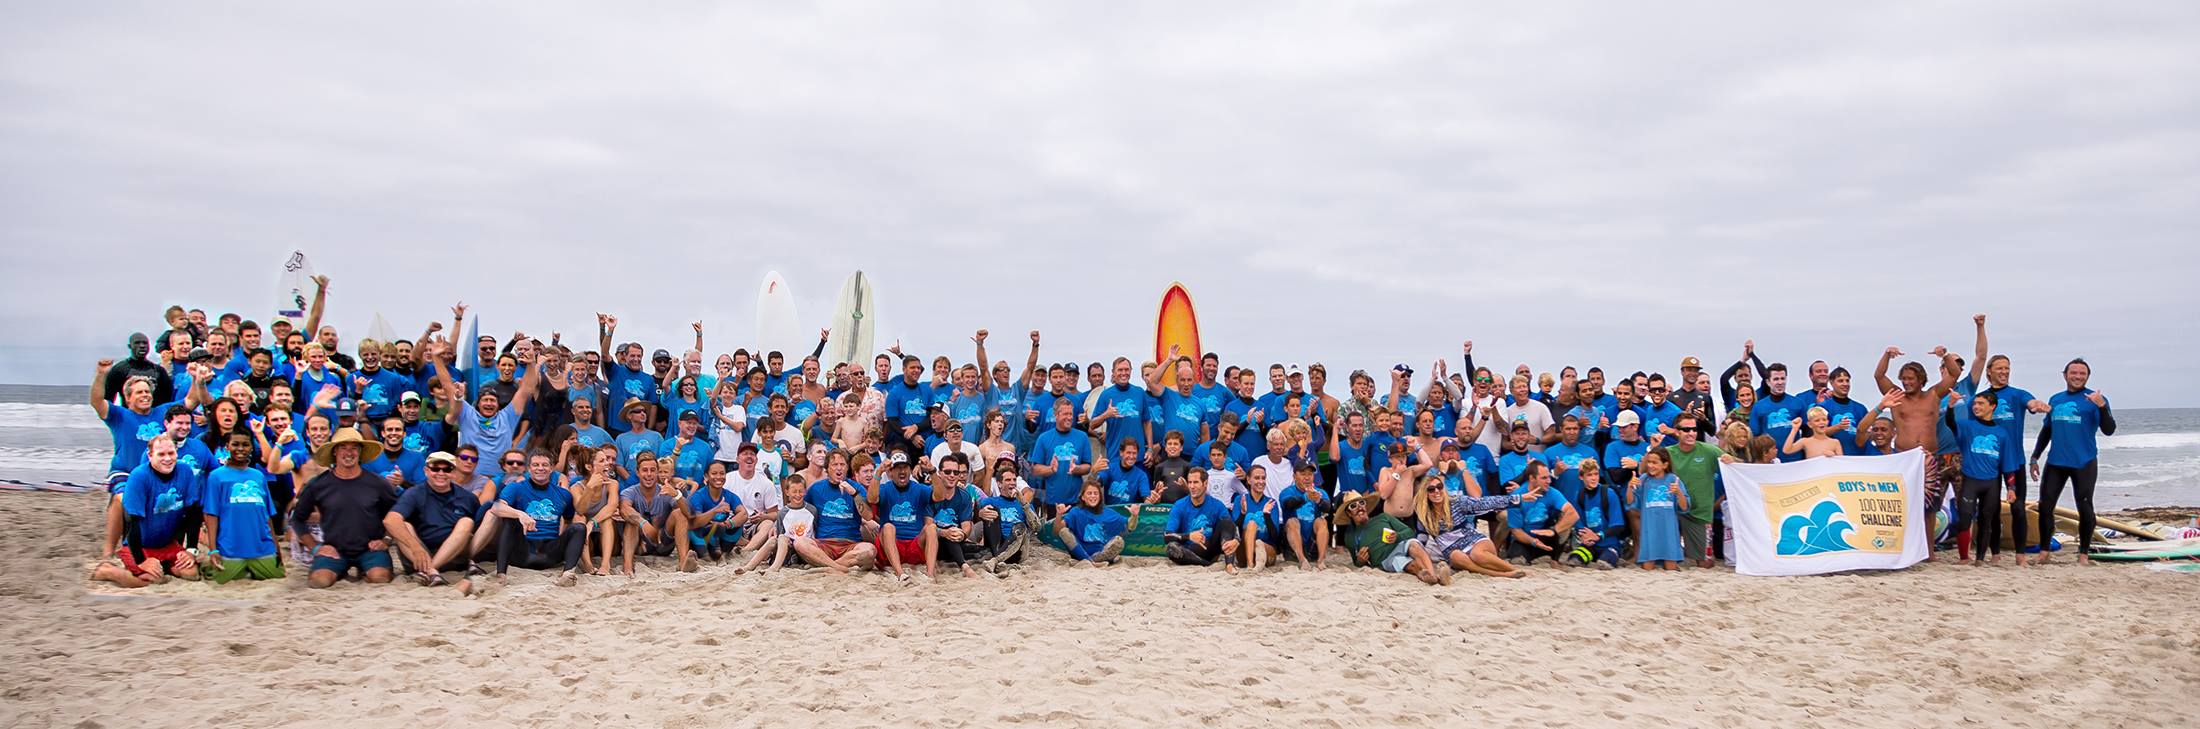 100 Wave Challenge THROWBACK to 2014 at the 5th annual event!